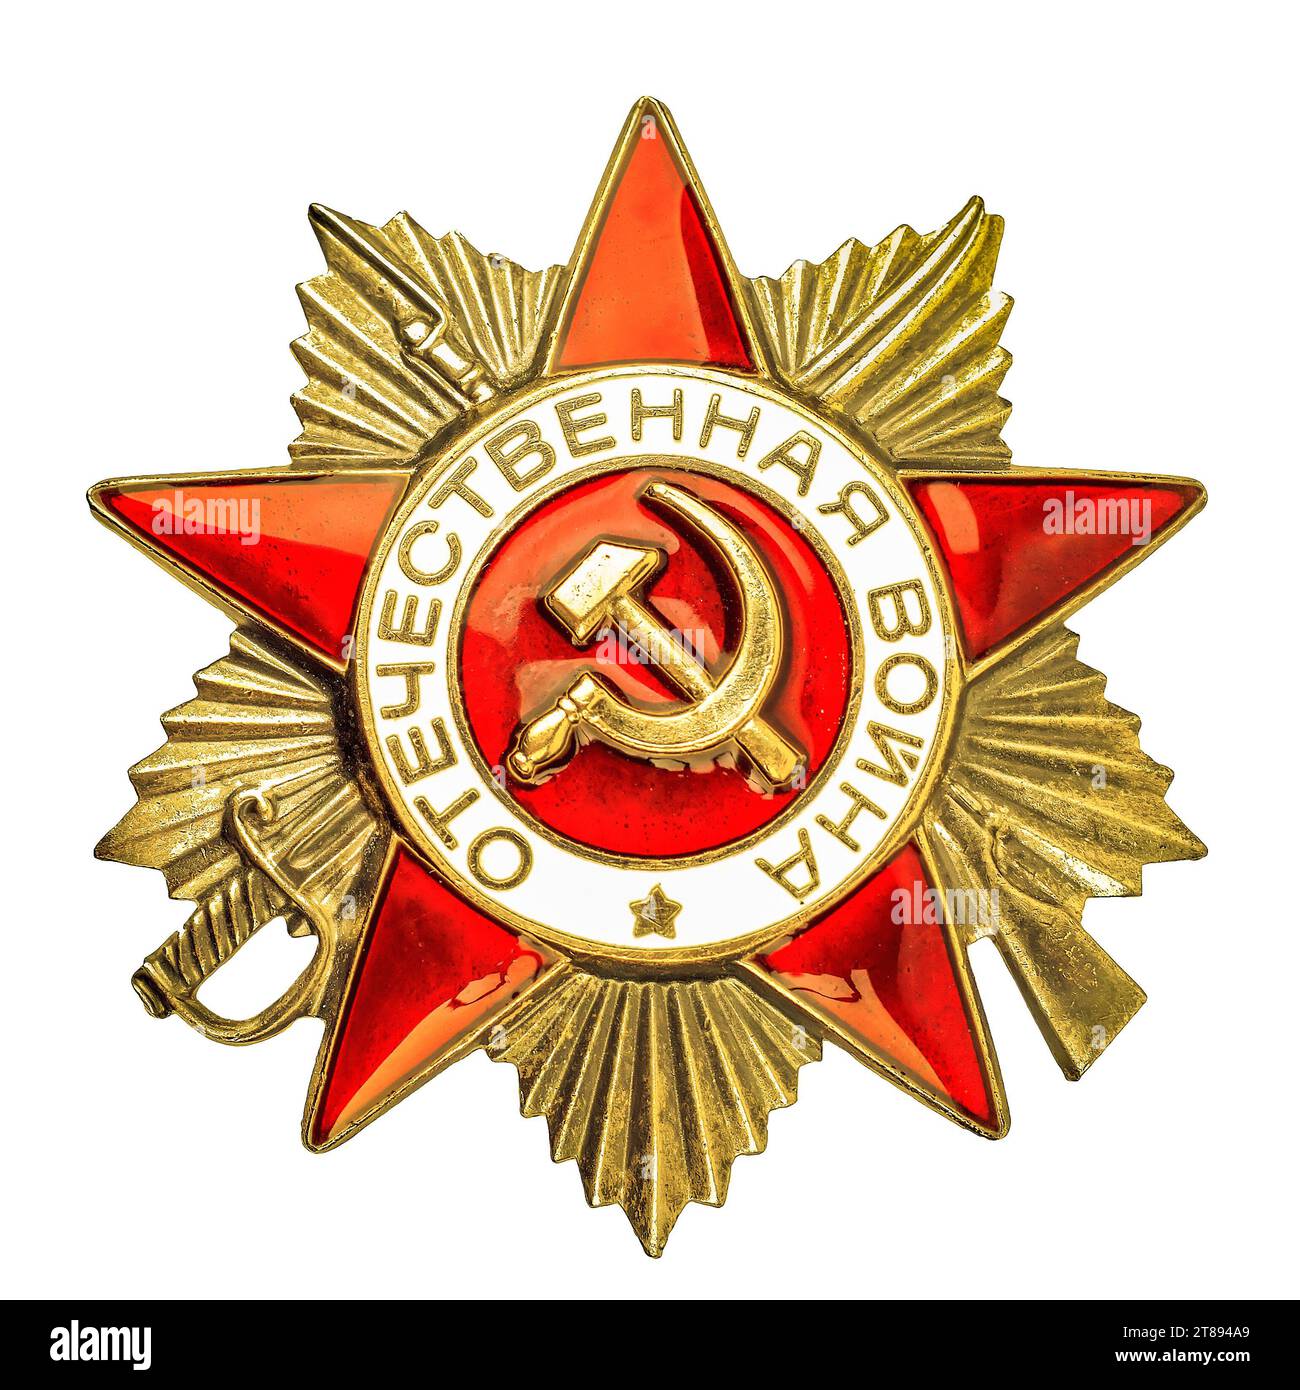 Soviet Order of the Great Patriotic War. Symbol of Russia's victory in World War II. The inscription 'Patriotic War'. Isolated on white. Stock Photo